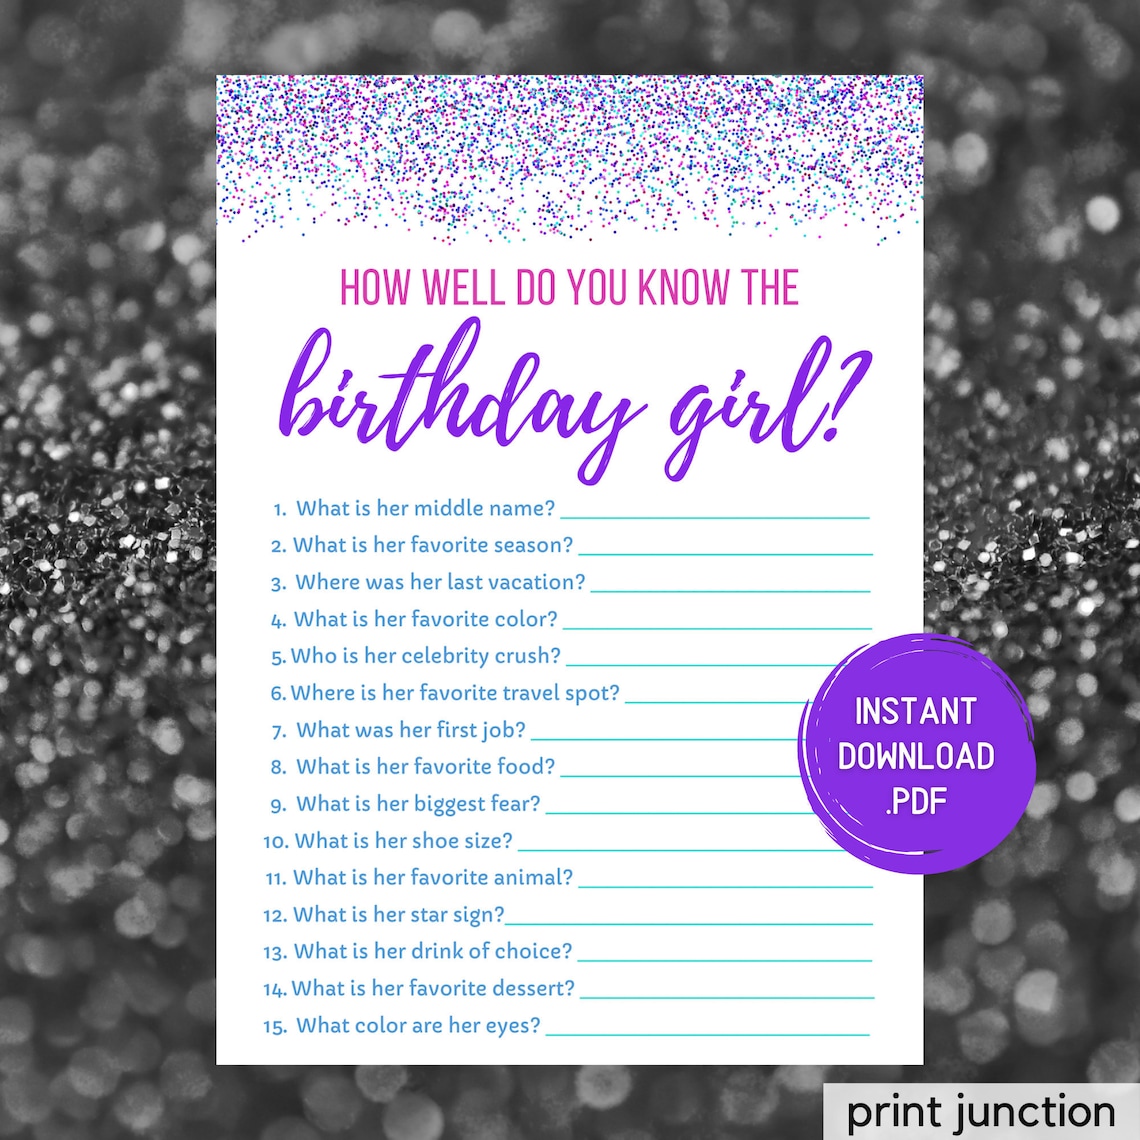 Who Knows the Birthday Girl Best How Well Do You Know the Birthday Girl ...